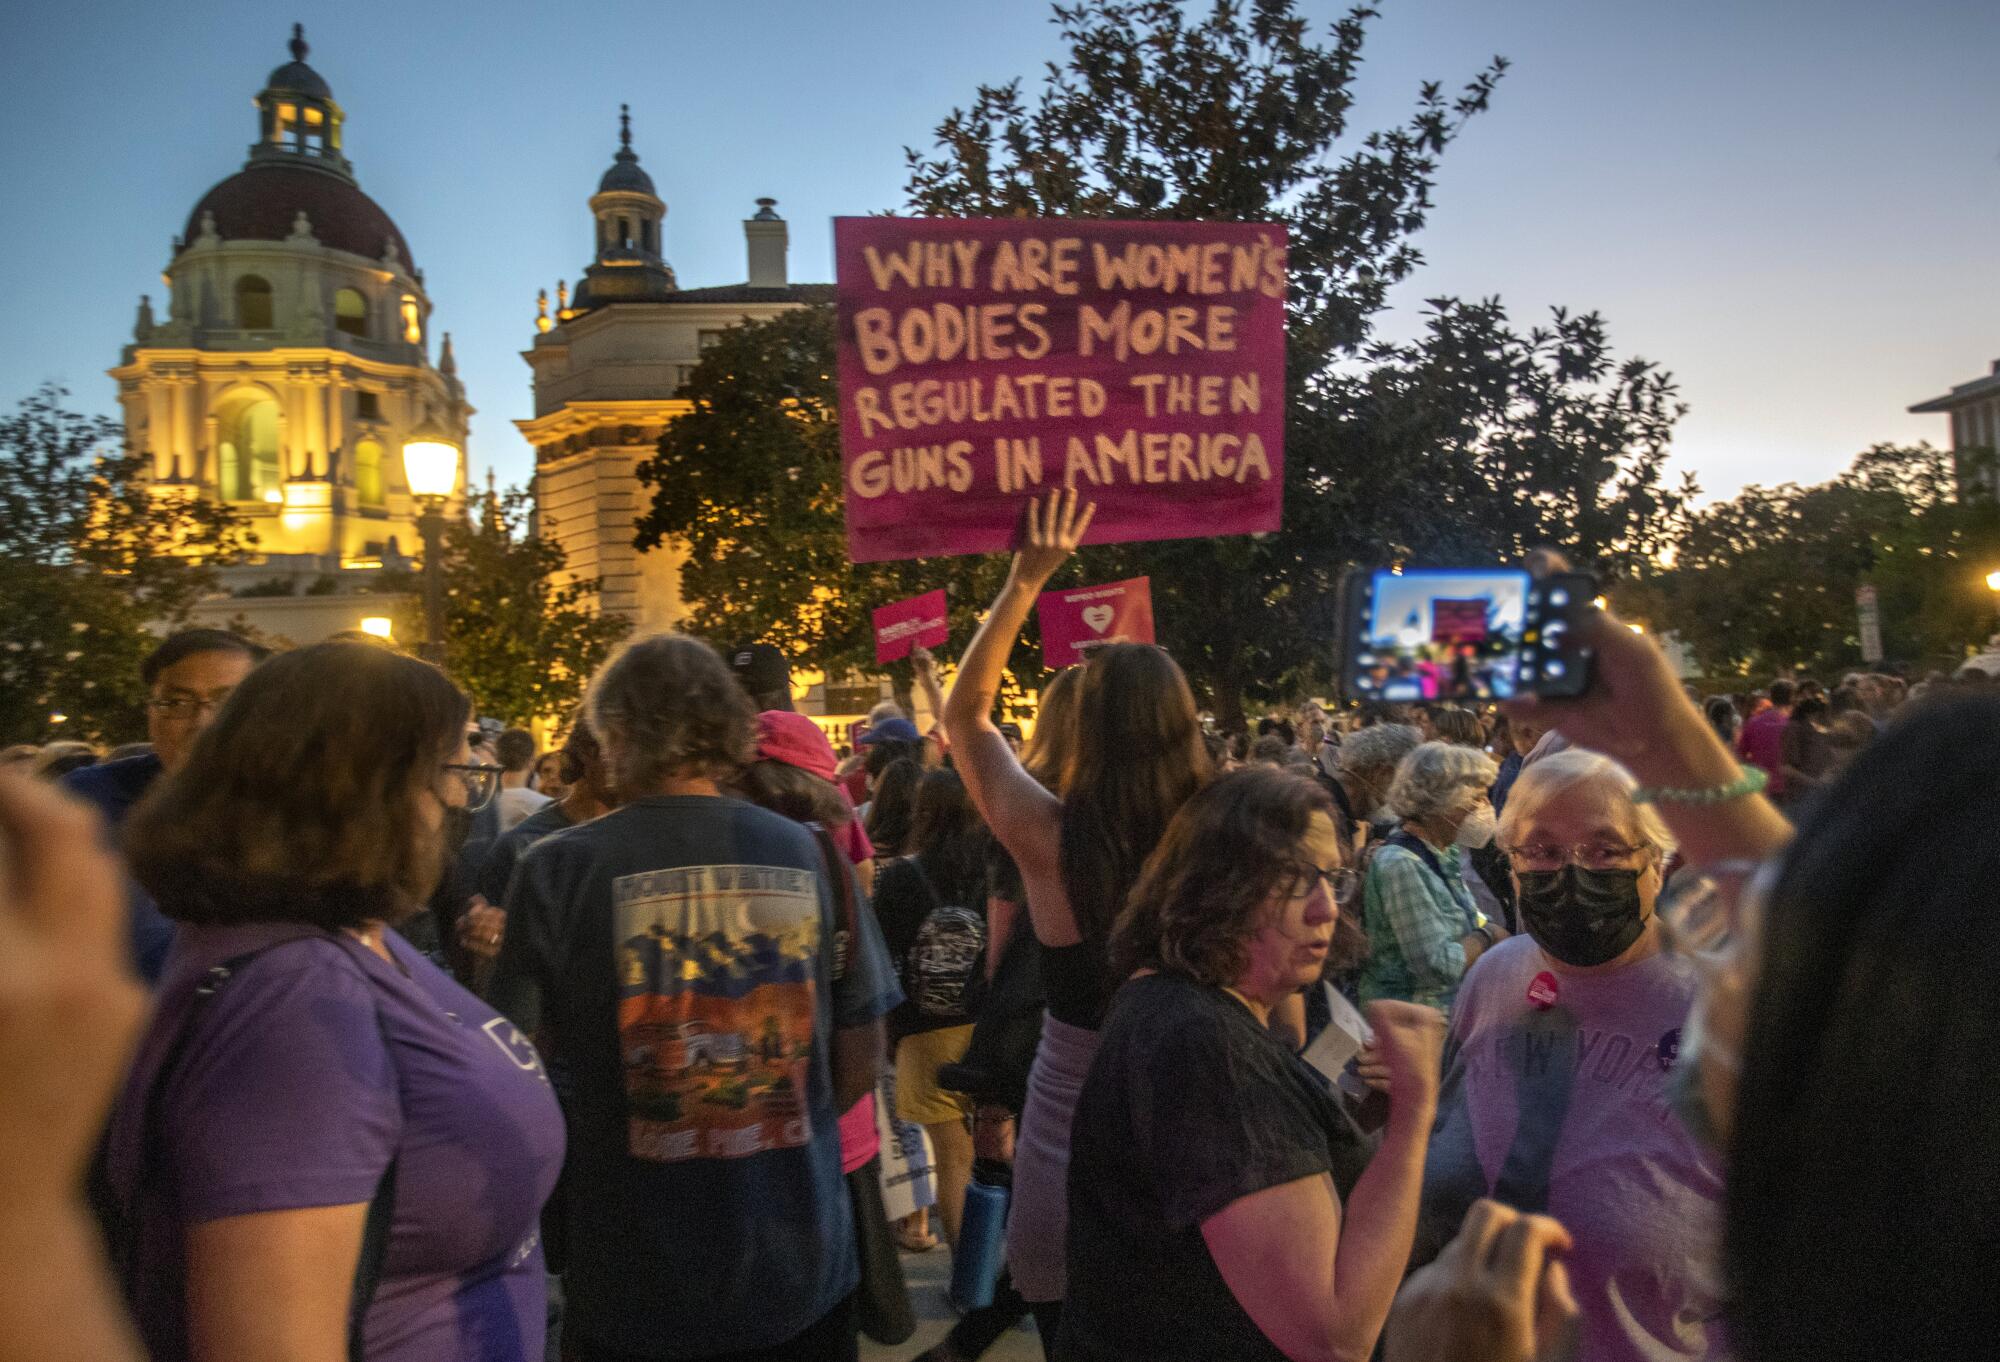 Protesters gather outdoors at twilight